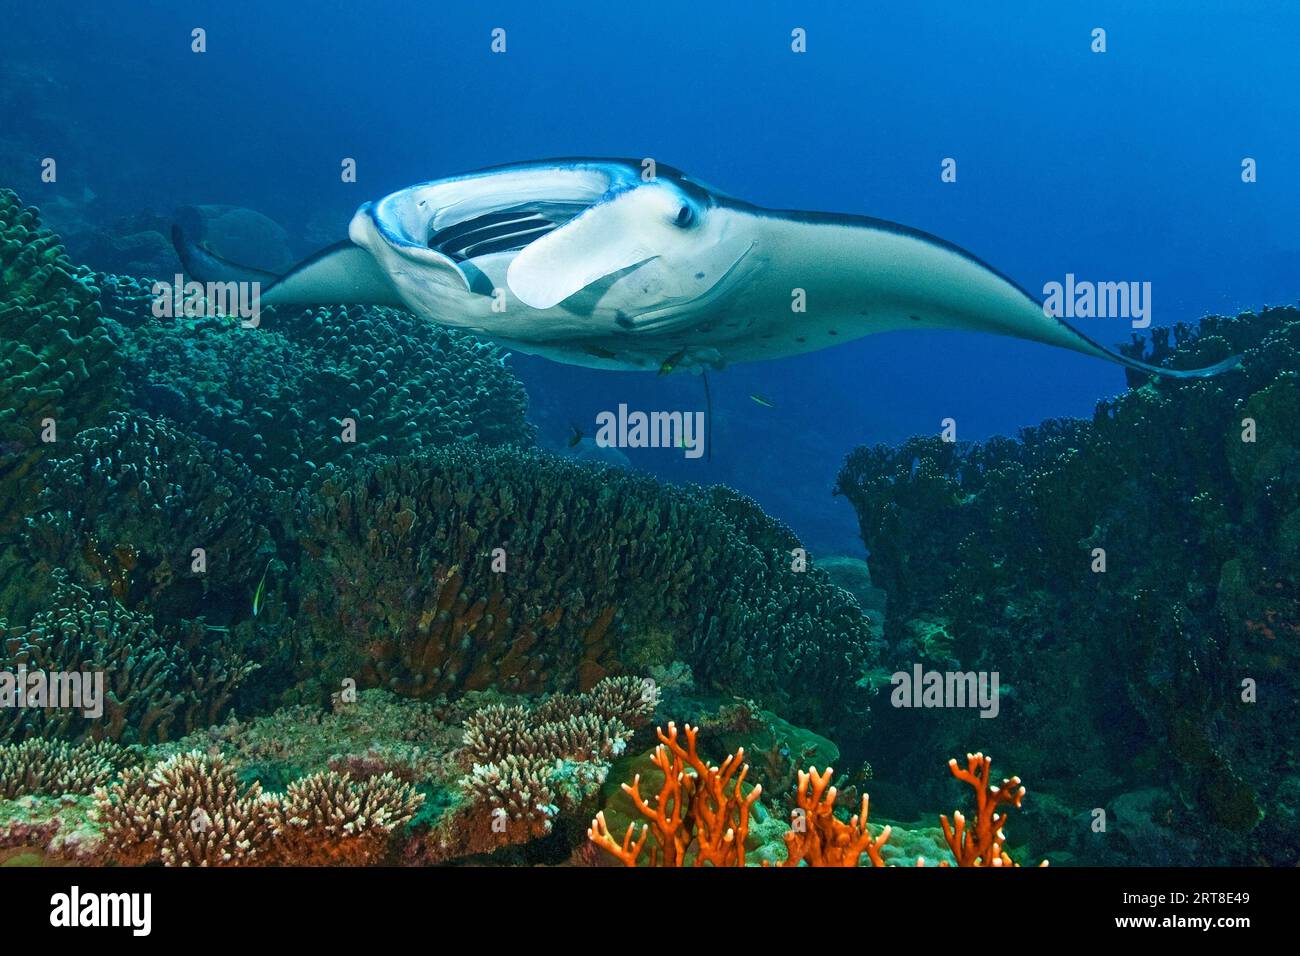 Symbiotic behaviour Symbiosis of reef manta ray (Manta alfredi) Manta ray hovers at waits over cleaner wrasse (Labroides dimidiatus) cleaner wrasse Stock Photo